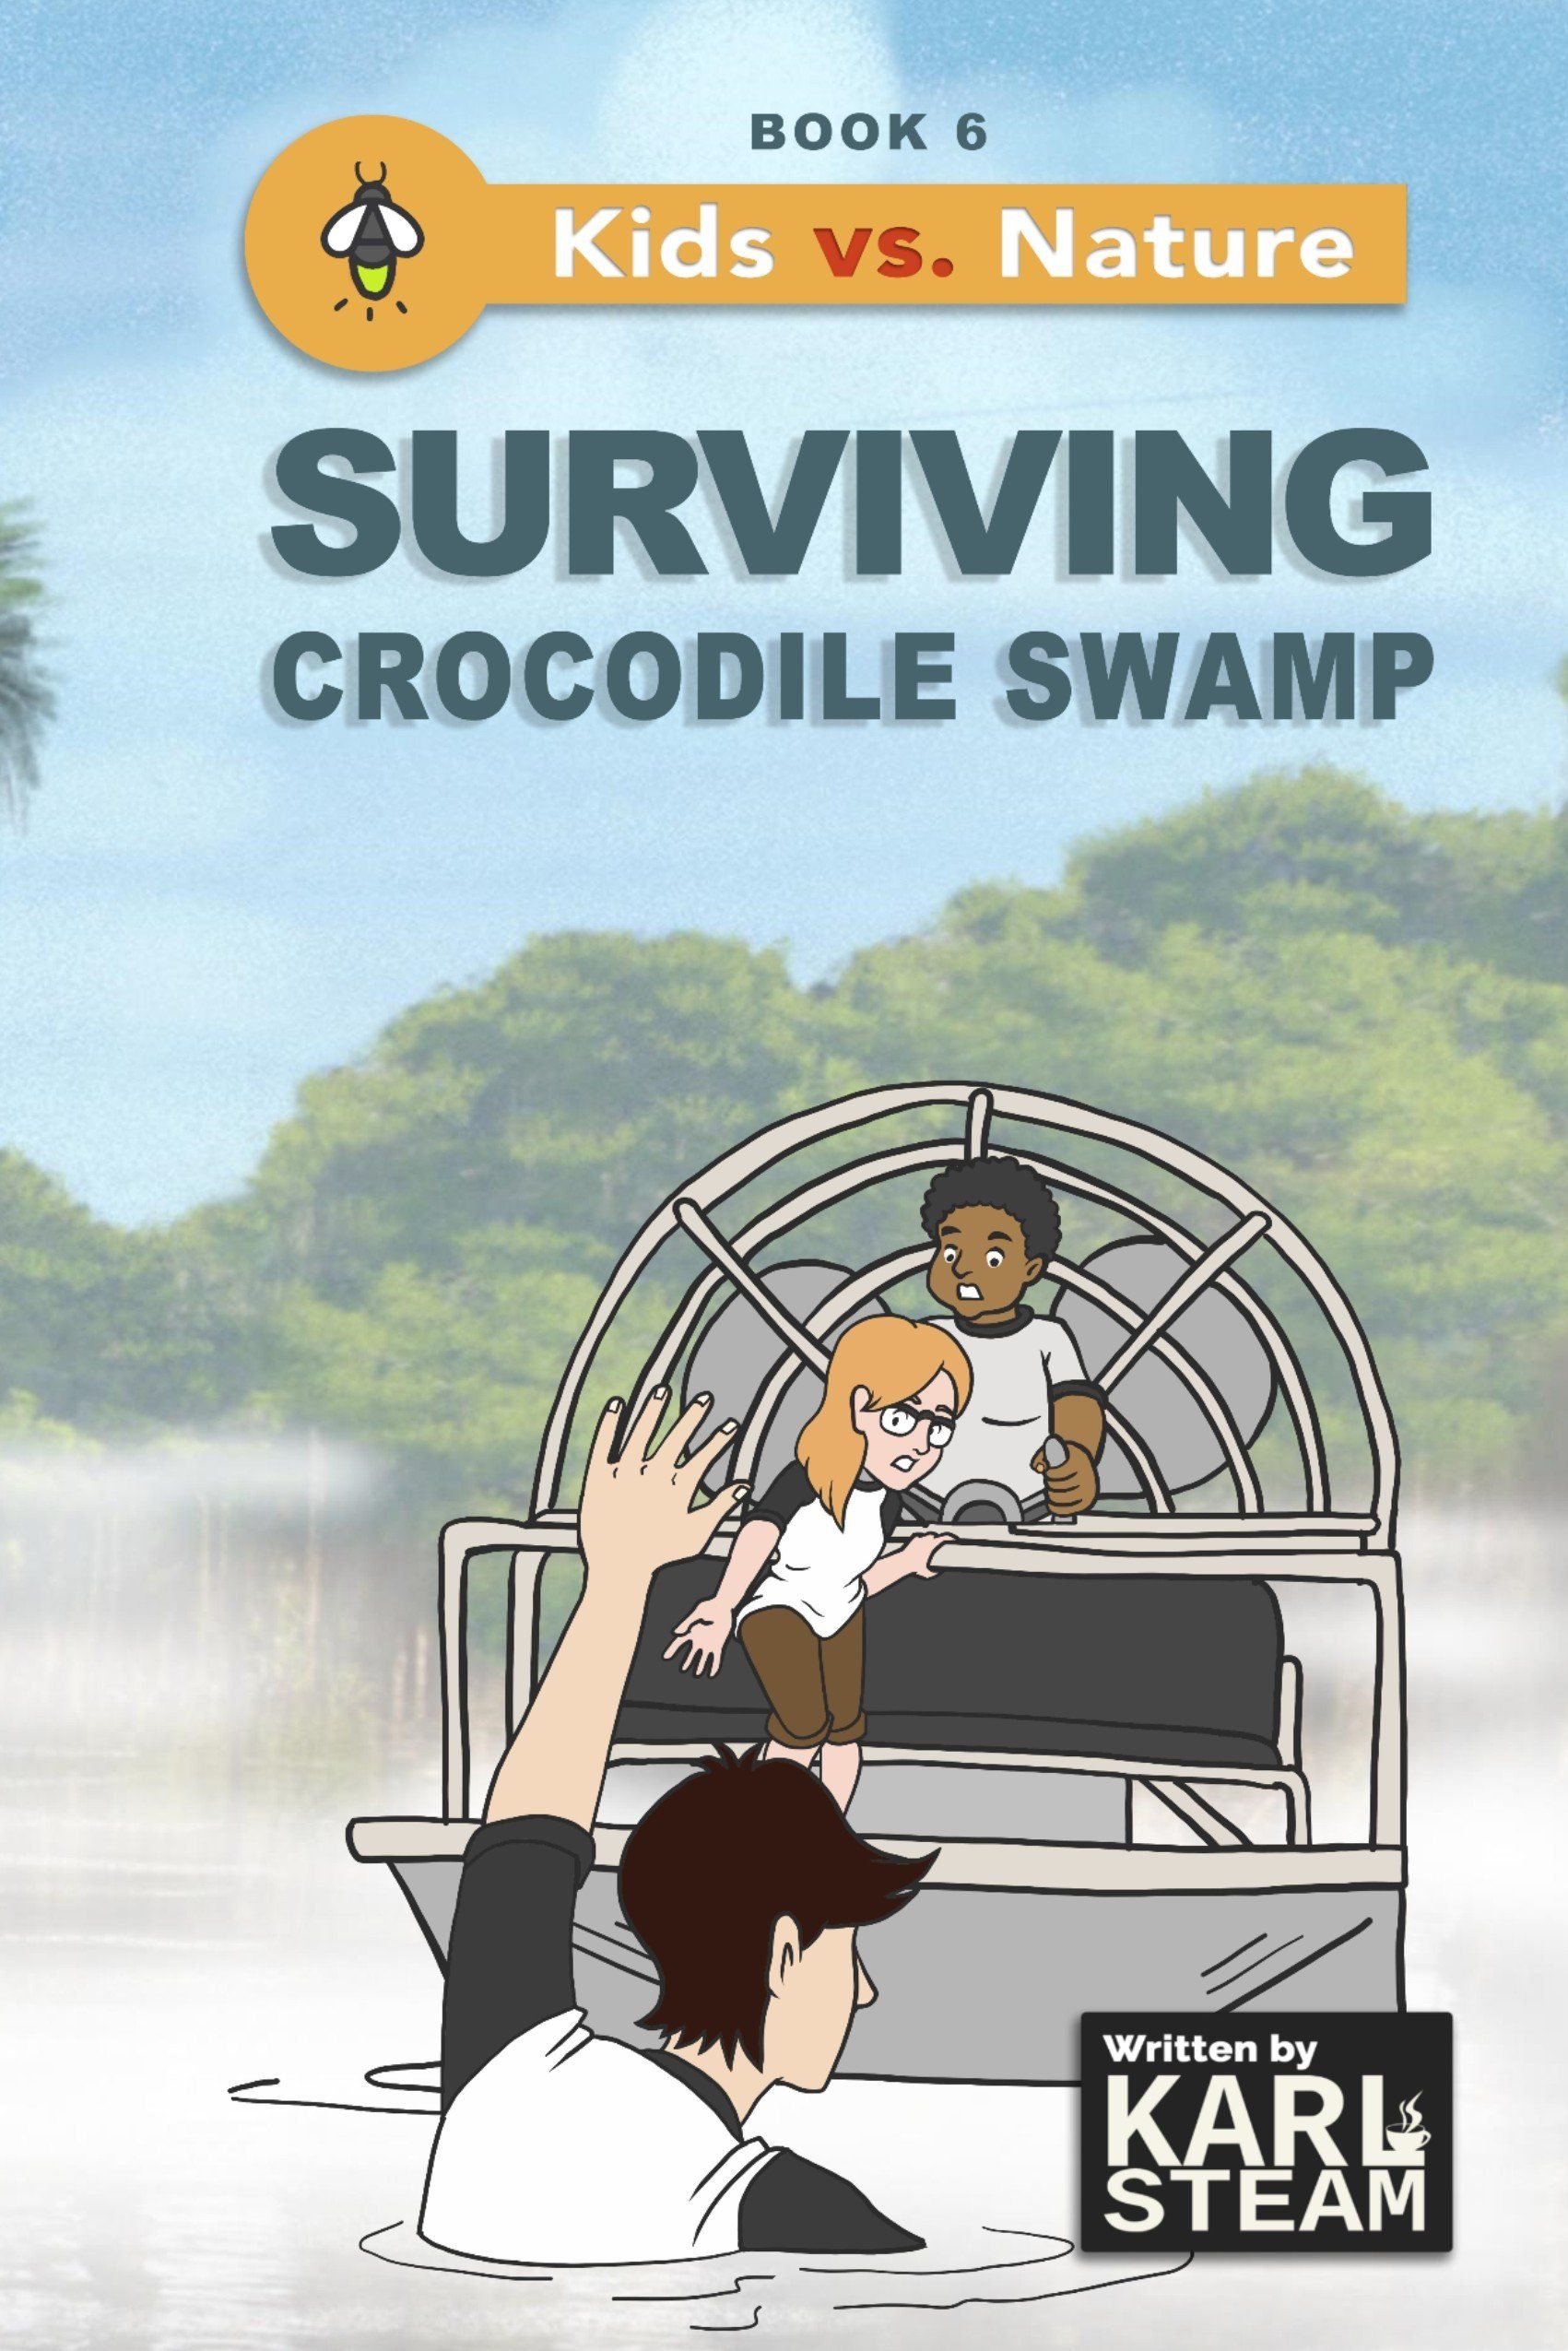 Book cover image of Surviving Crocodile Swamp: Kids vs. Nature (Book 6). Two children in a fan boat and one child in the water reaching his arm up for help.  Written by Karl Steam.